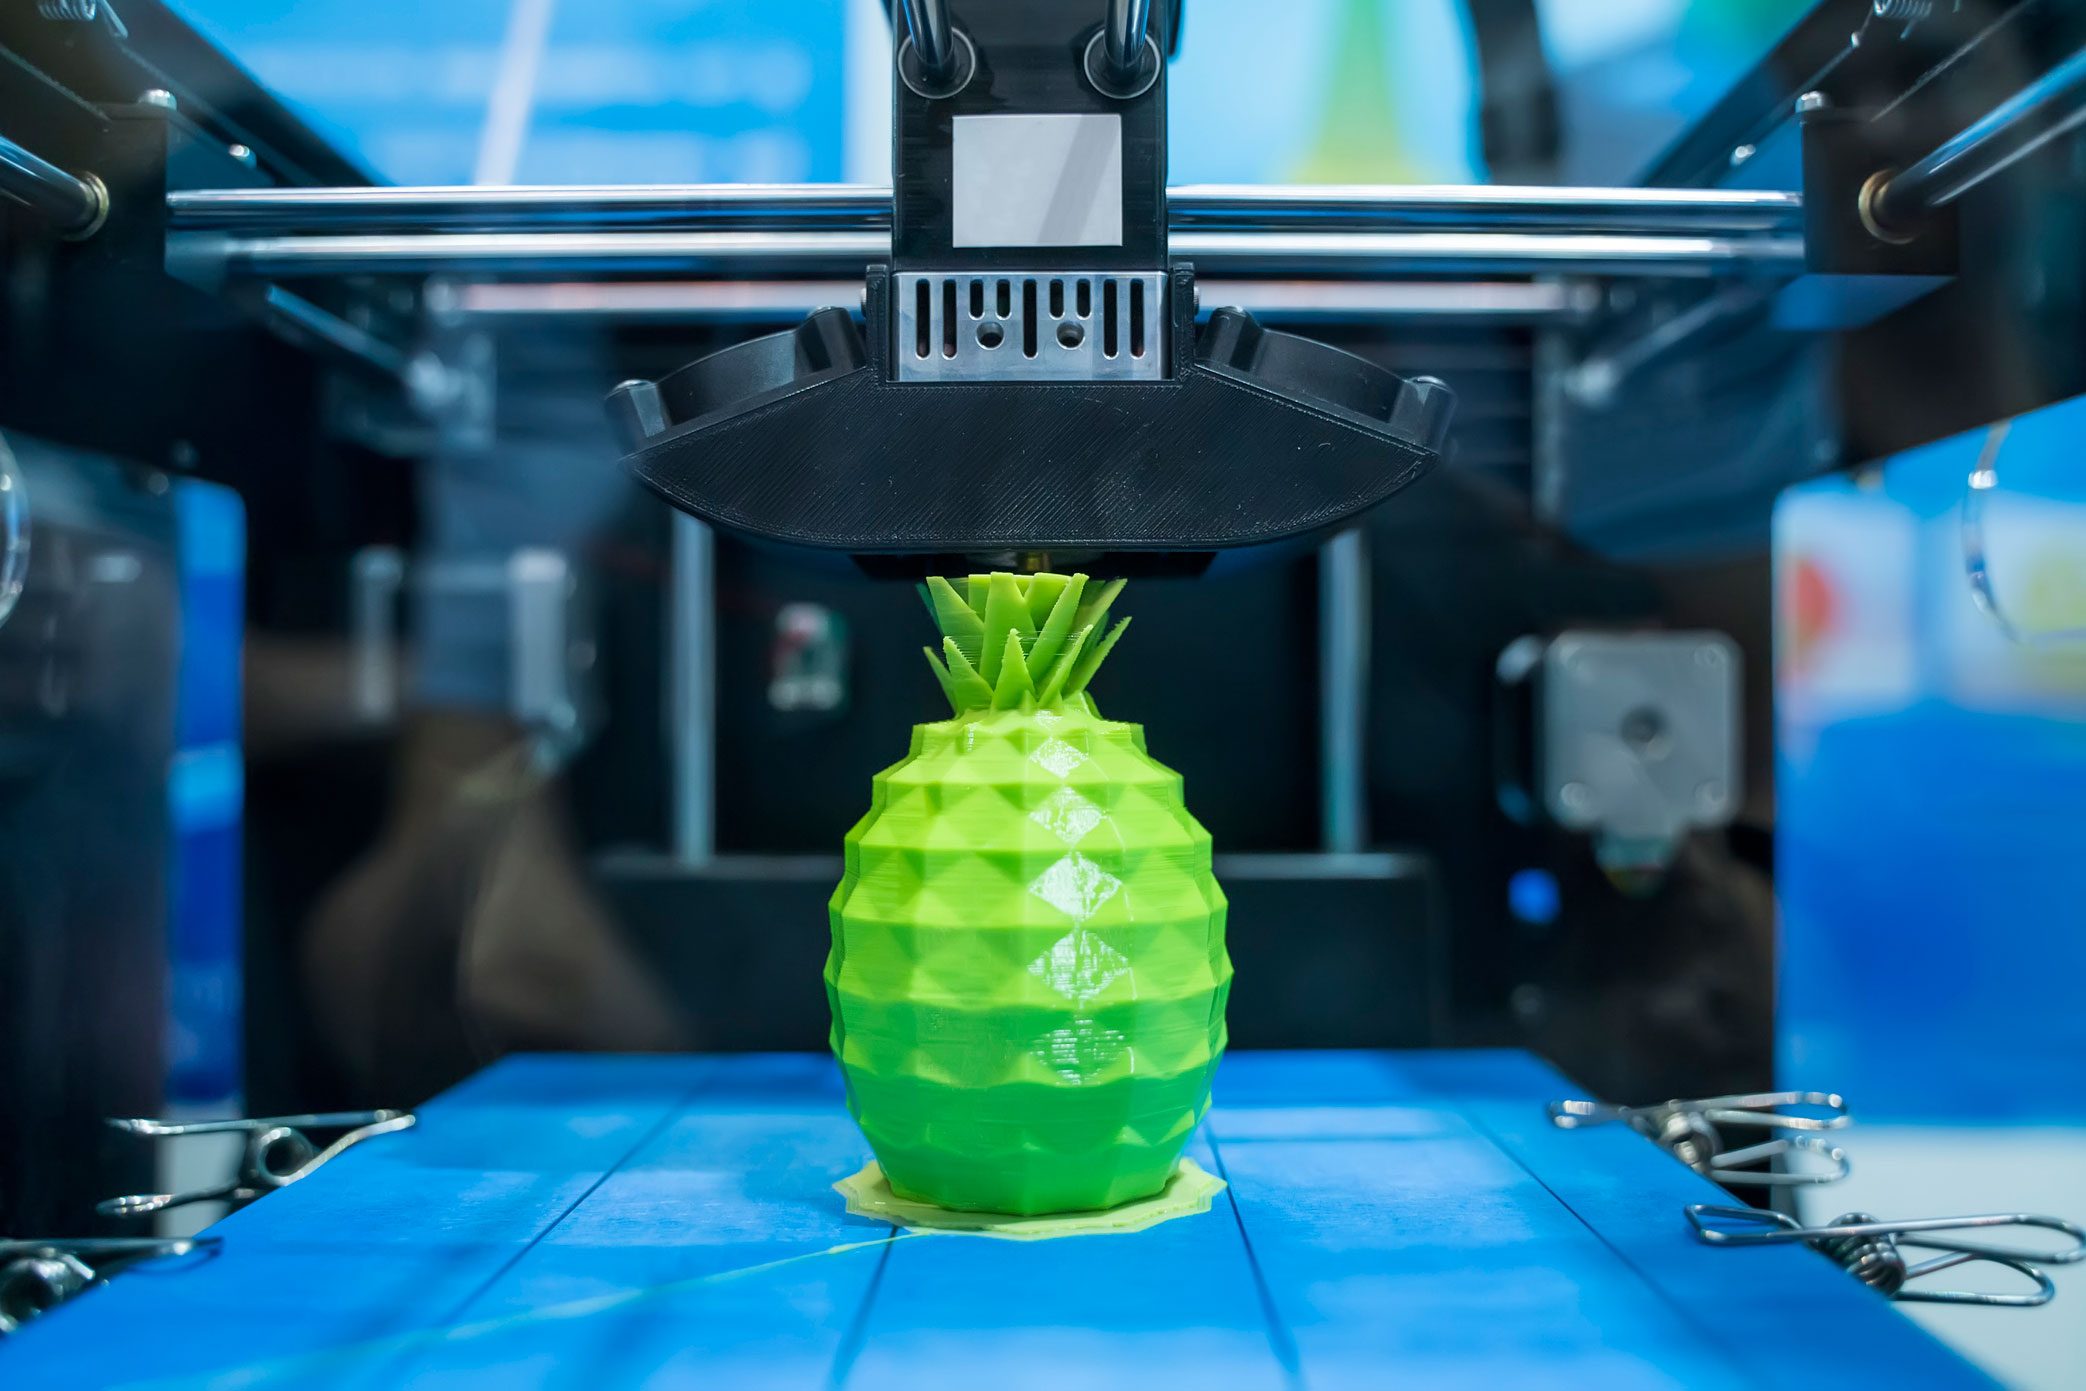 A New Batch of 3D Printers Can Print Models in Half the Time